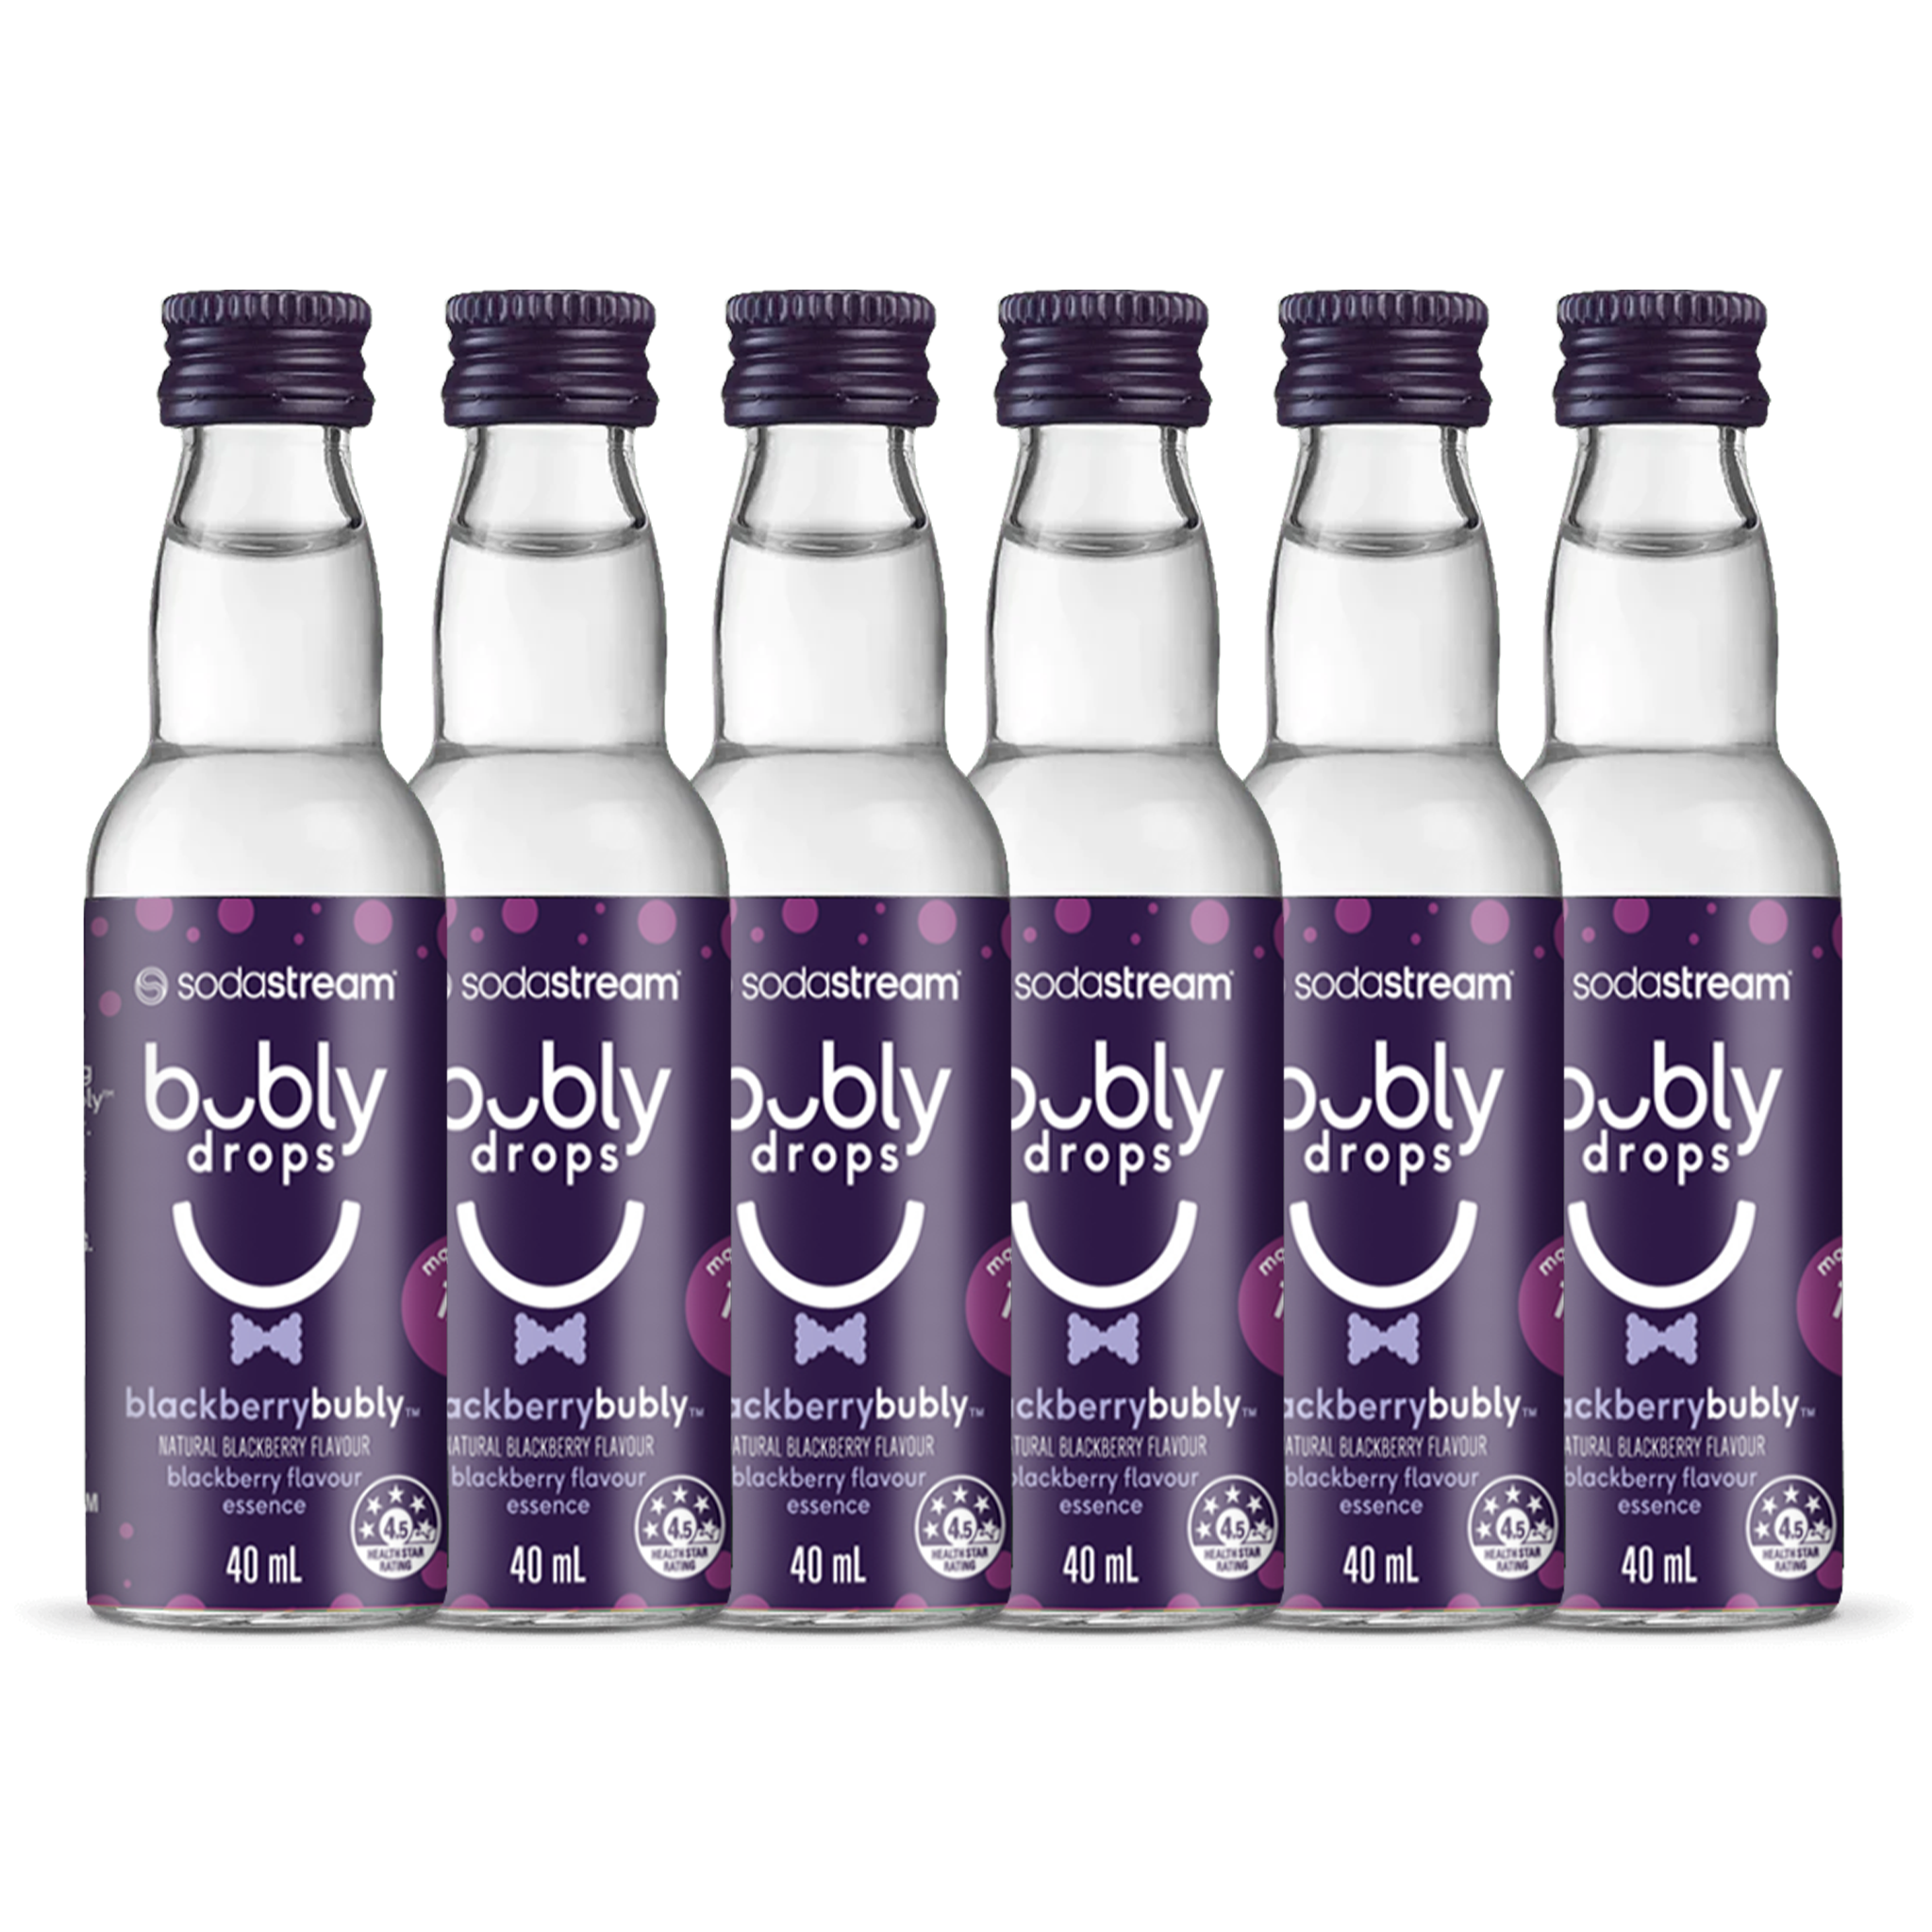 blackberry bubly drops™ 6 Pack sodastream